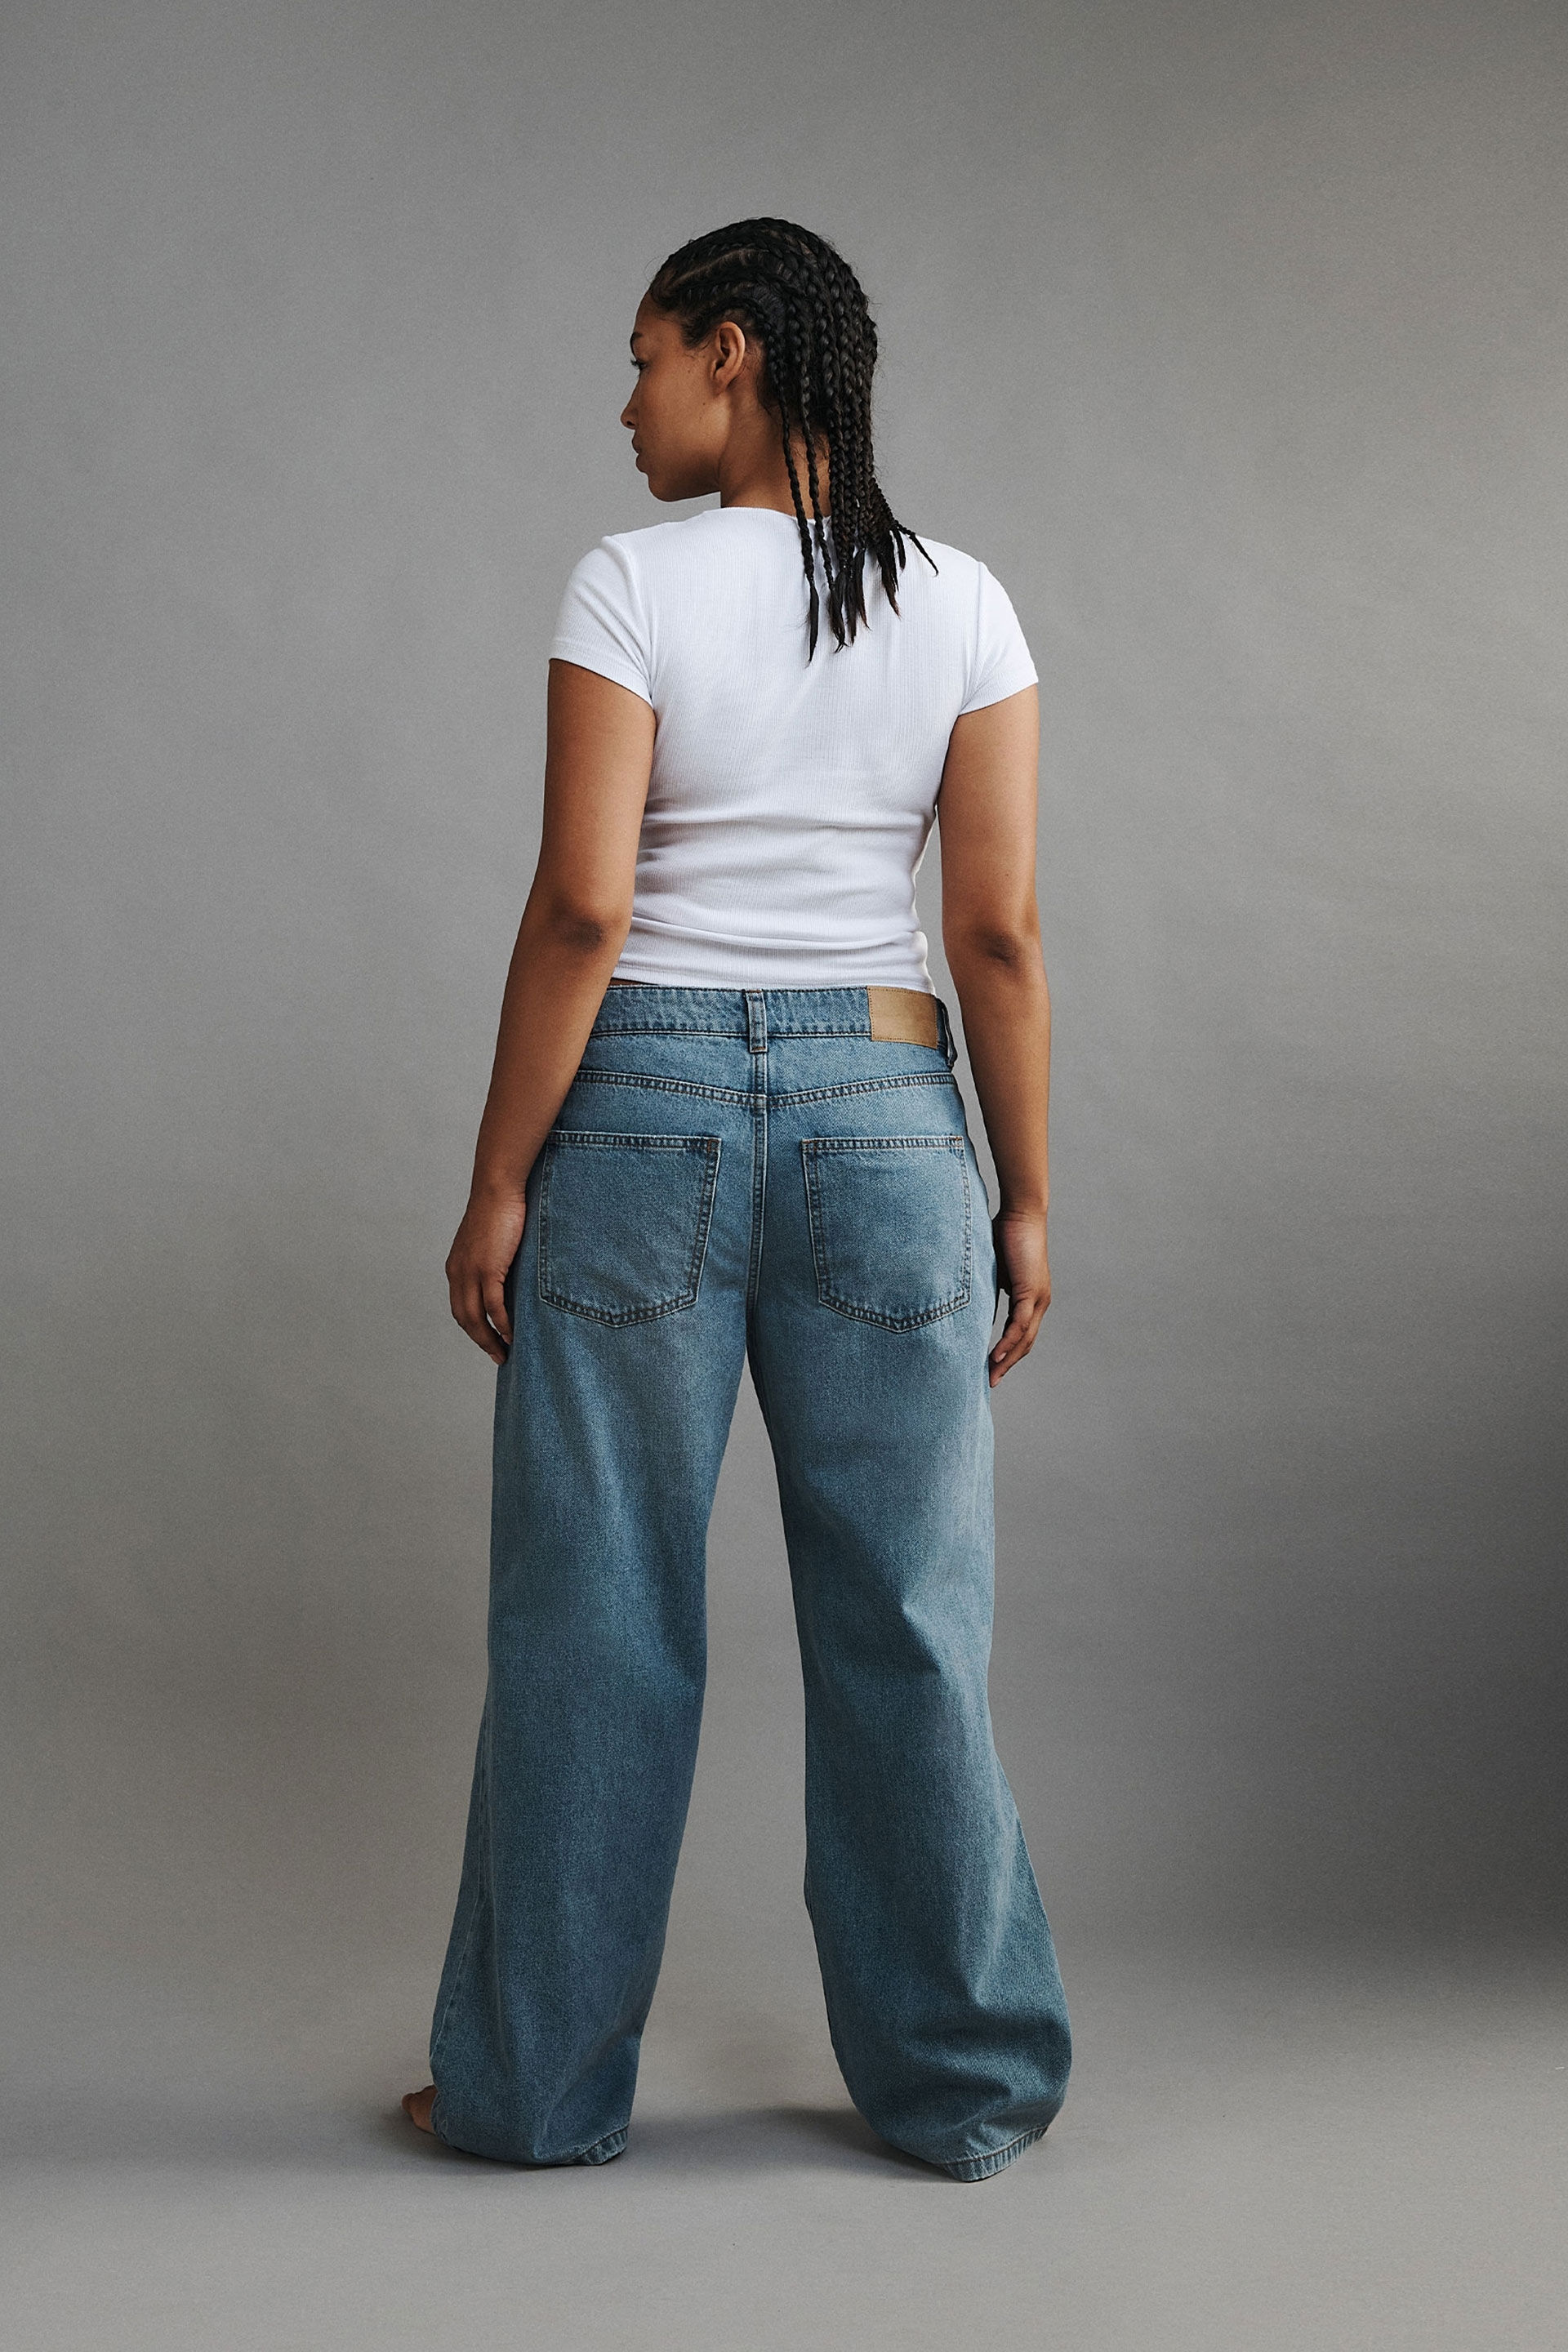 Buy SOLID BLUE HIGH-RISE BAGGY JEANS for Women Online in India